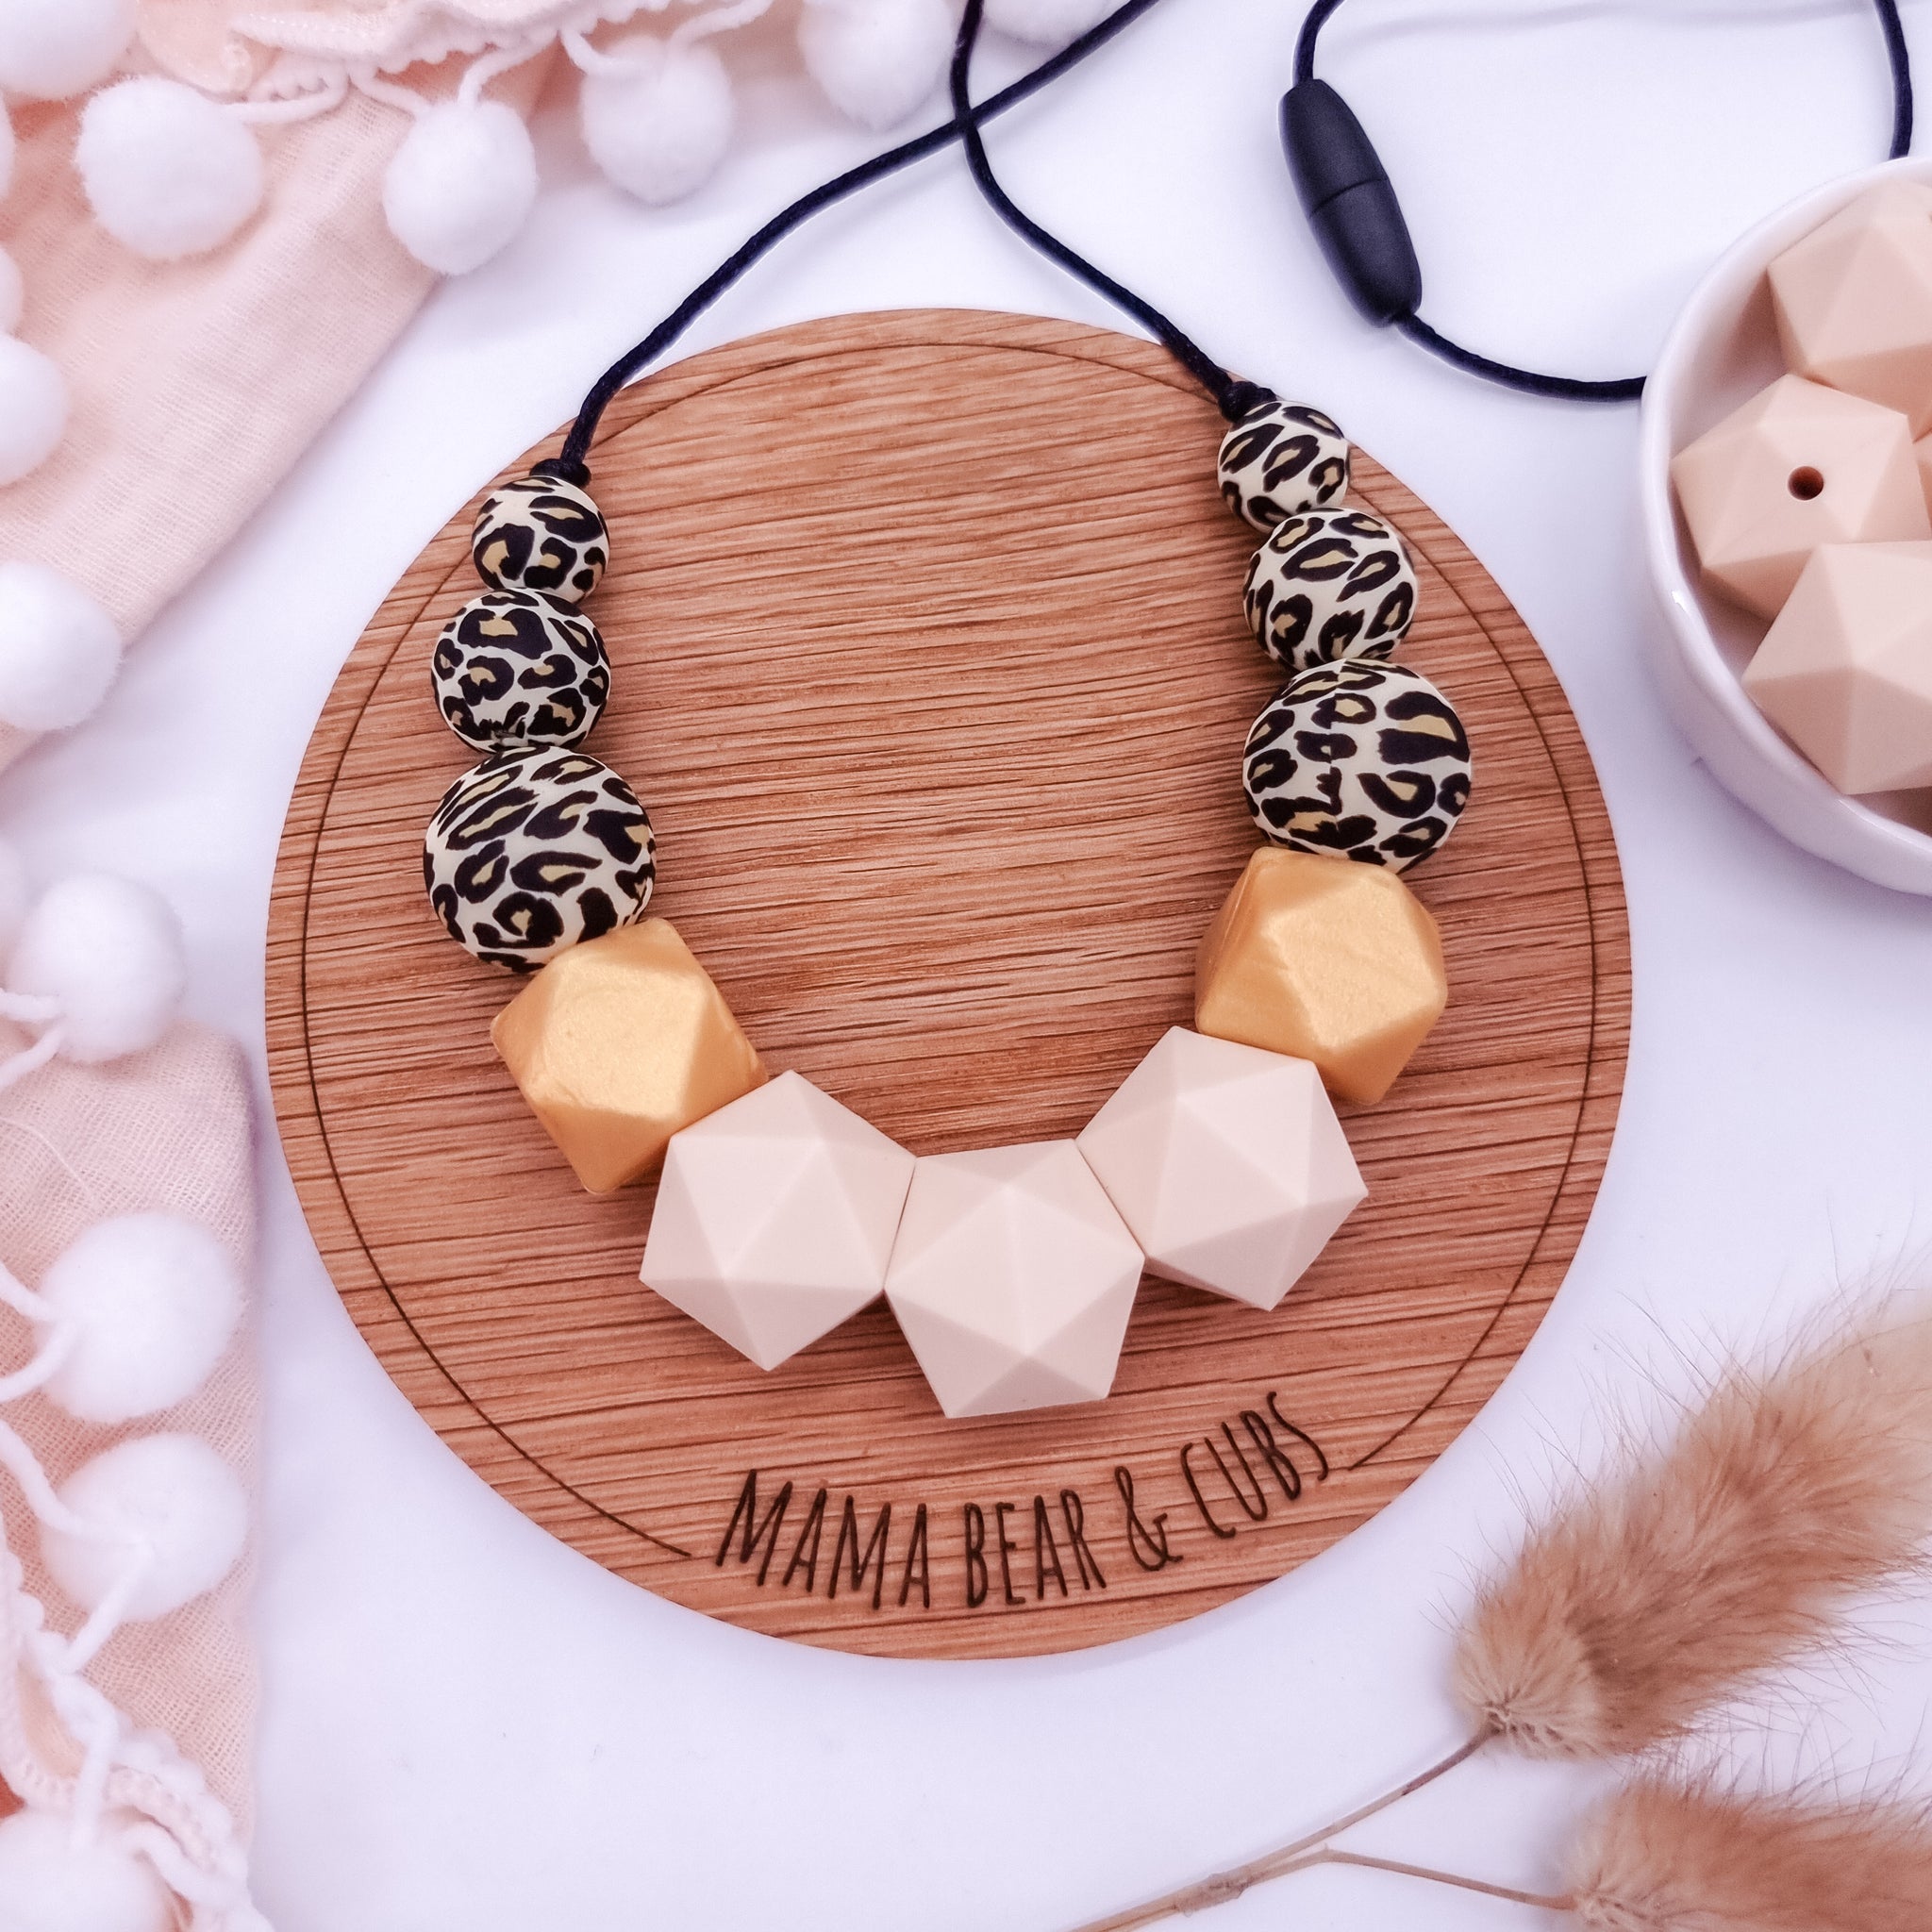 Breastmilk Jewellery: A keepsake from your special journey! - Shopping :  Bump, Baby and You, Pregnancy, Parenting and Baby Advice and Info